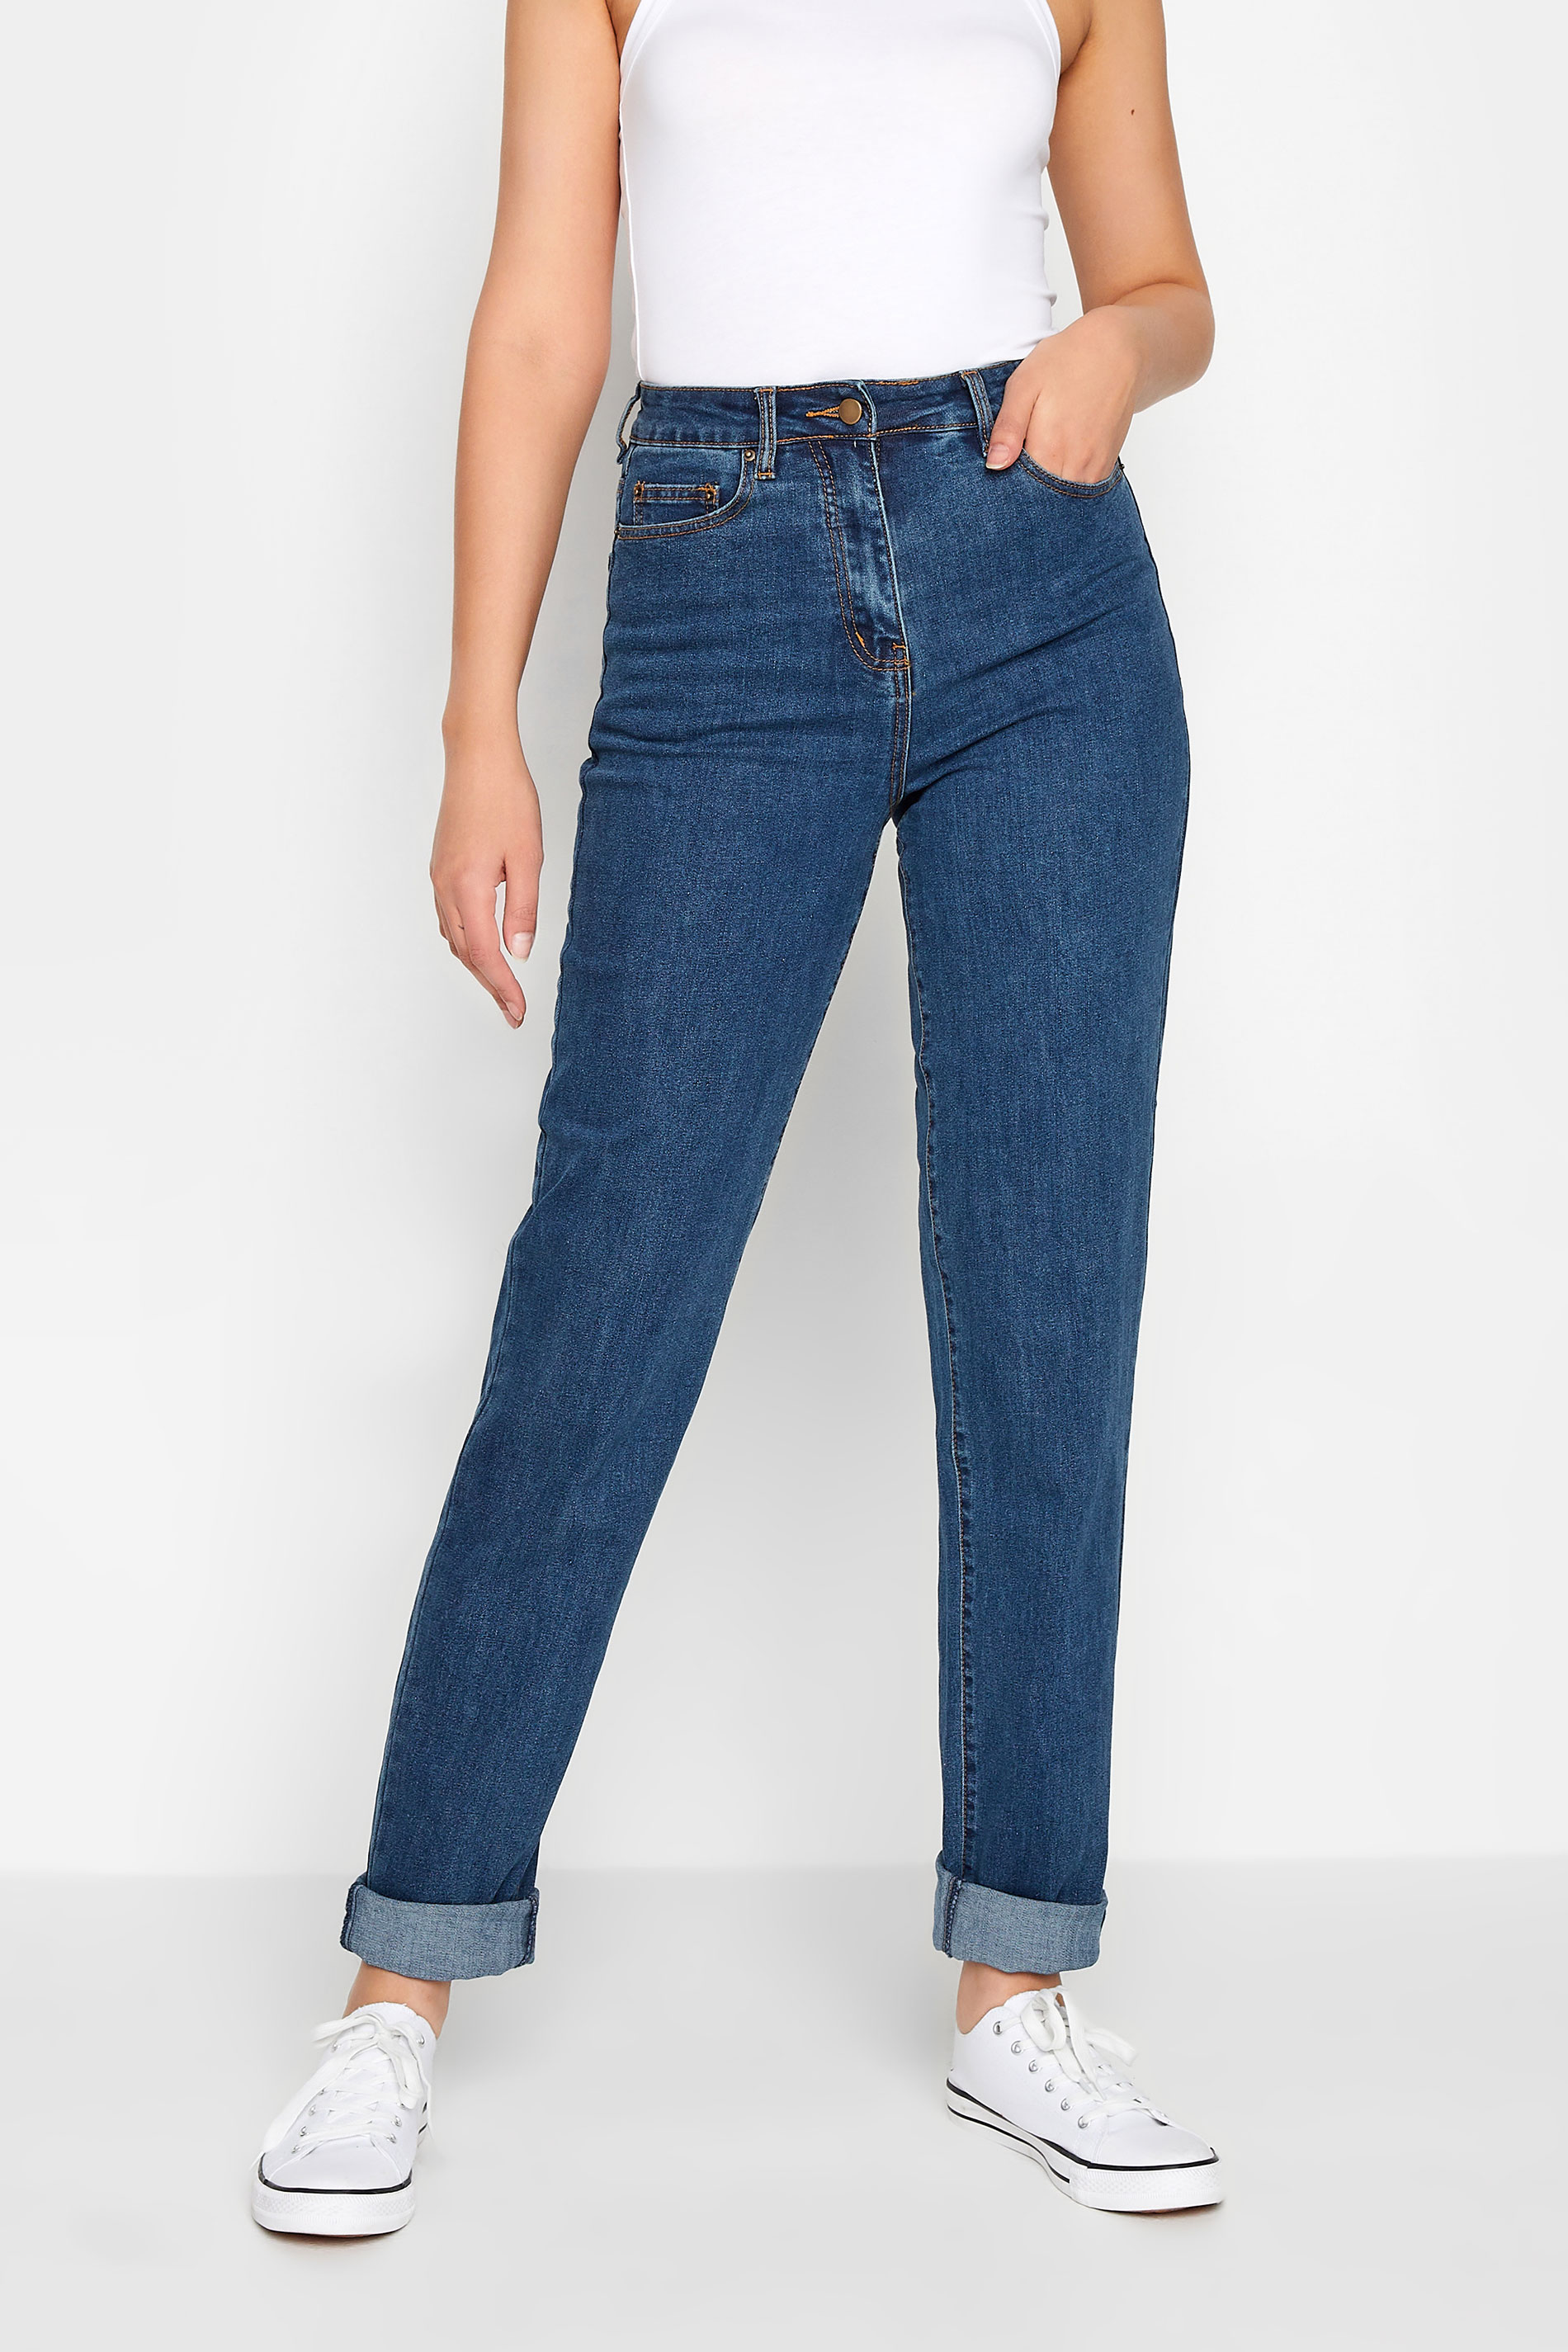 LTS Tall Women's Indigo Blue Washed UNA Mom Jeans | Long Tall Sally 2